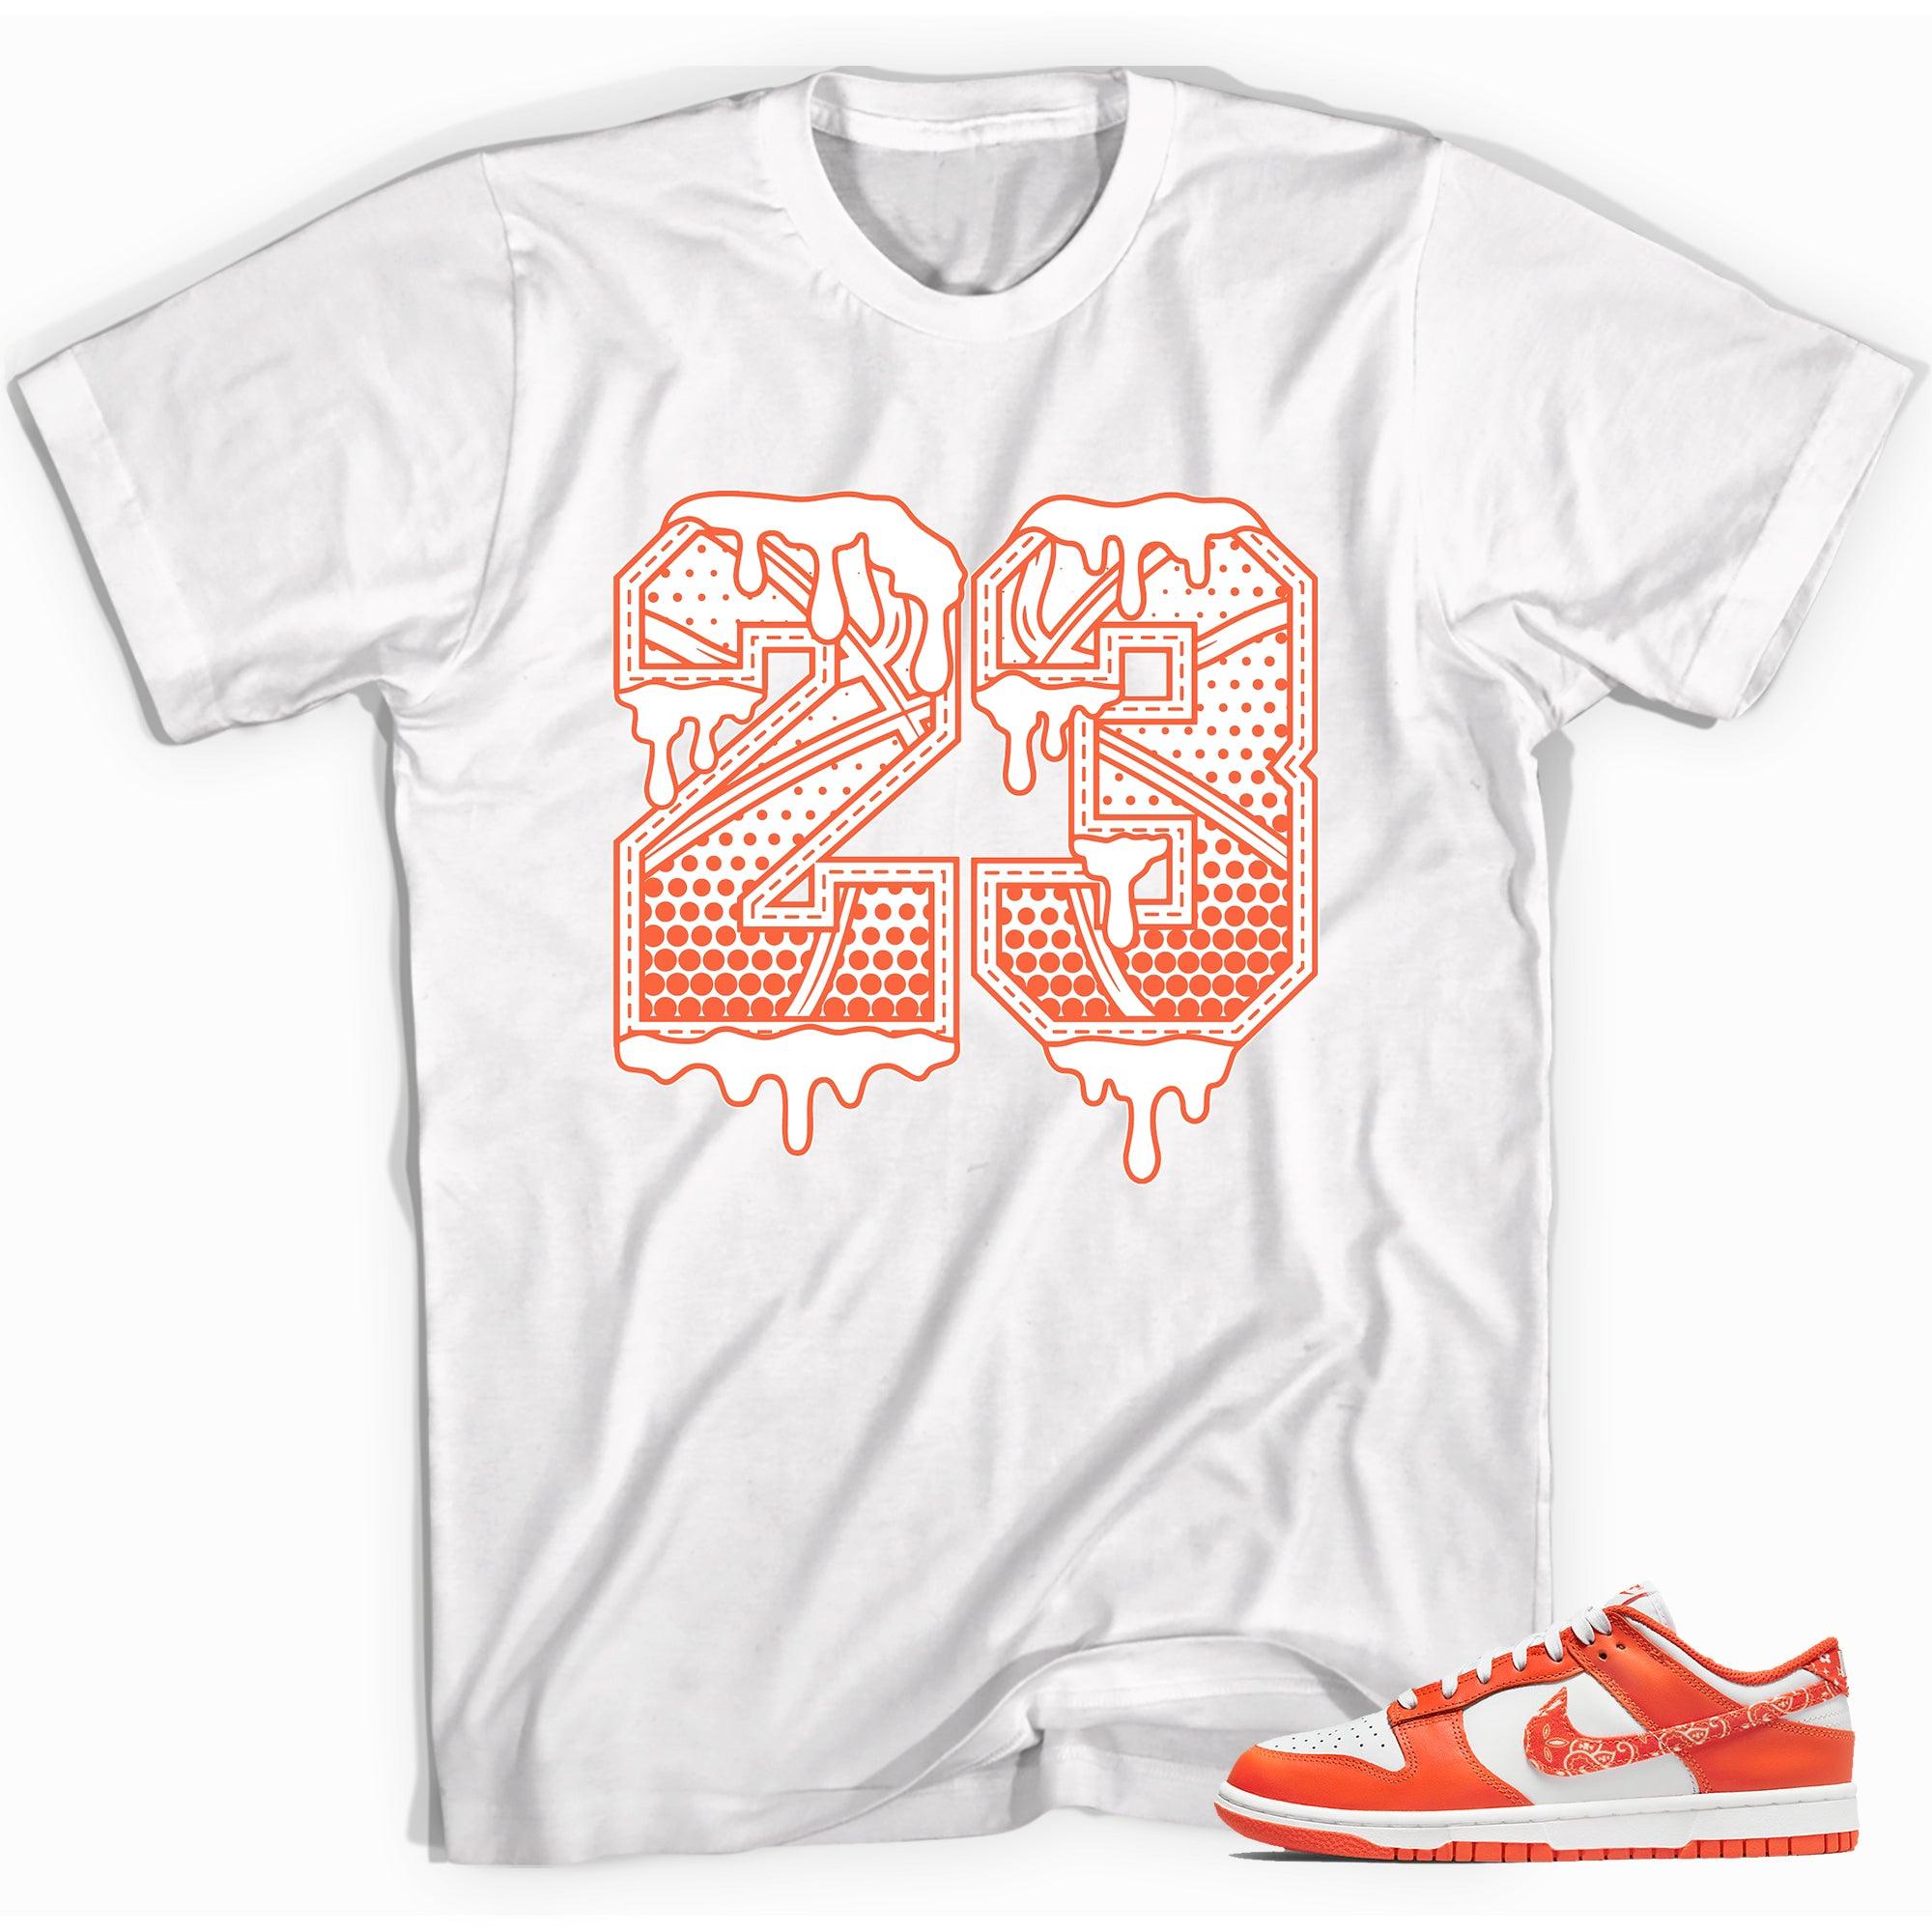 Number 23 Ball Shirt Nike Dunk Low Essential Paisley Pack Orange photo